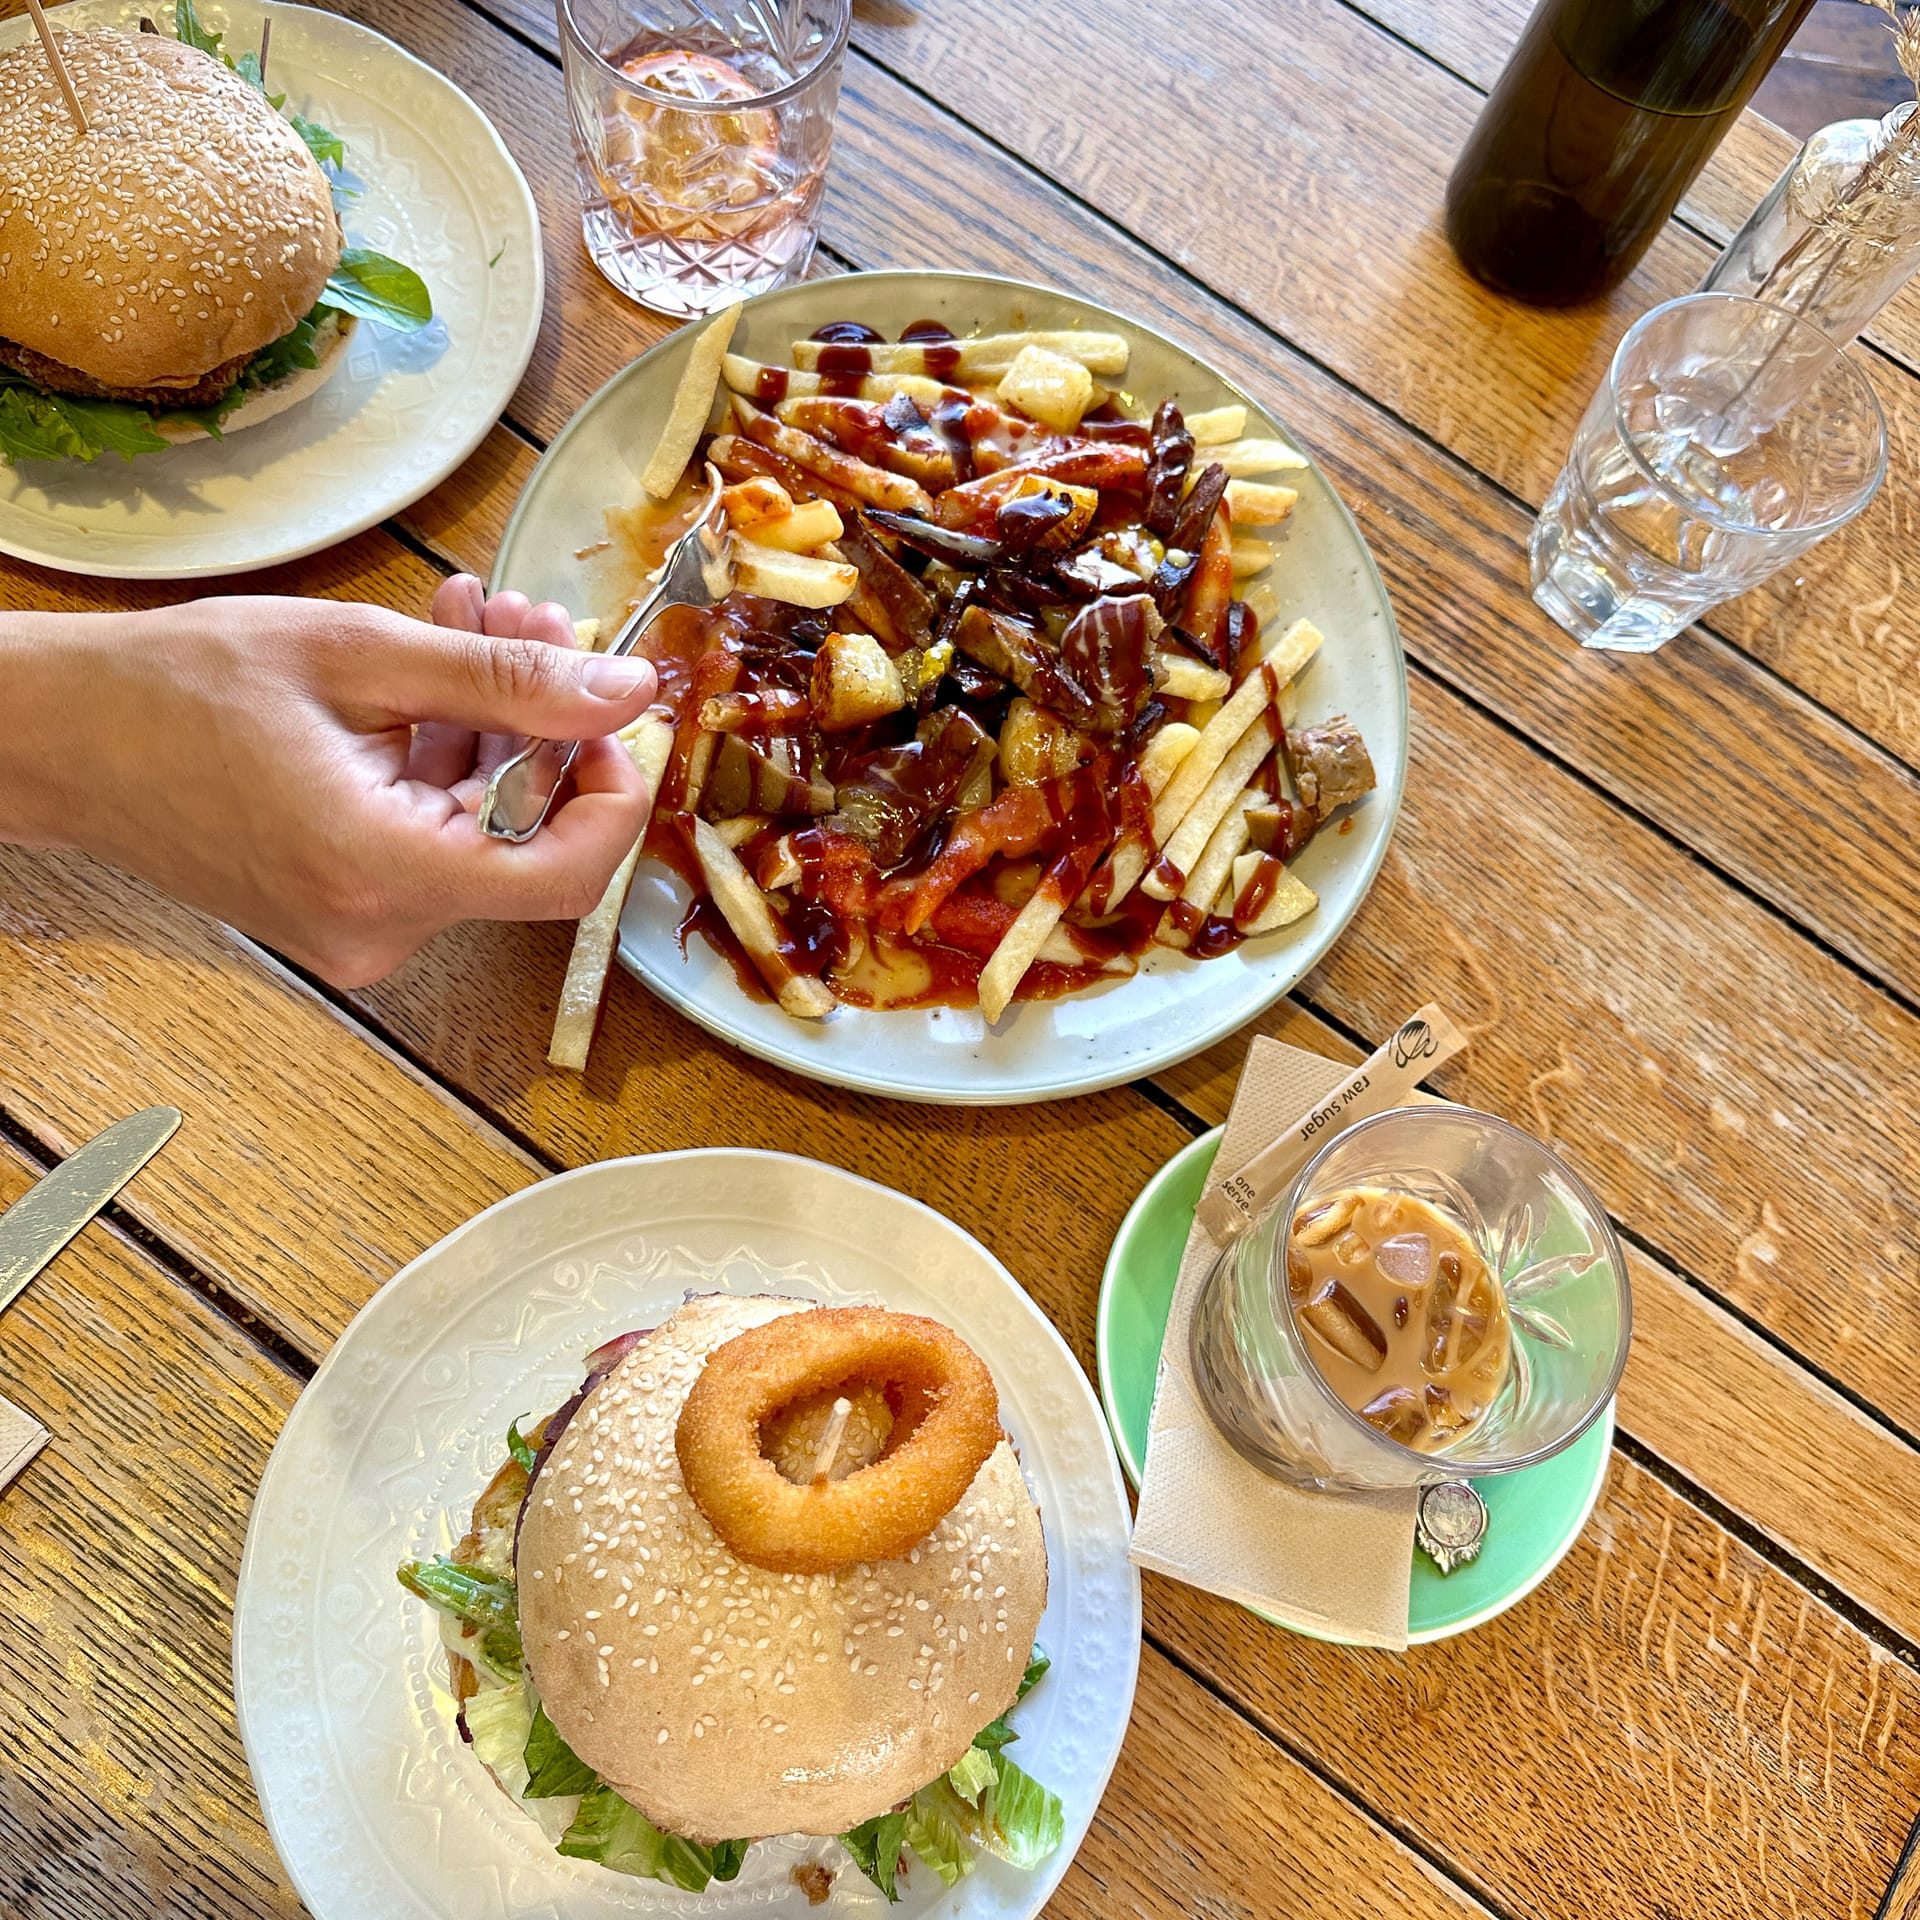 Two burgers at Grater Goods with Loaded fries